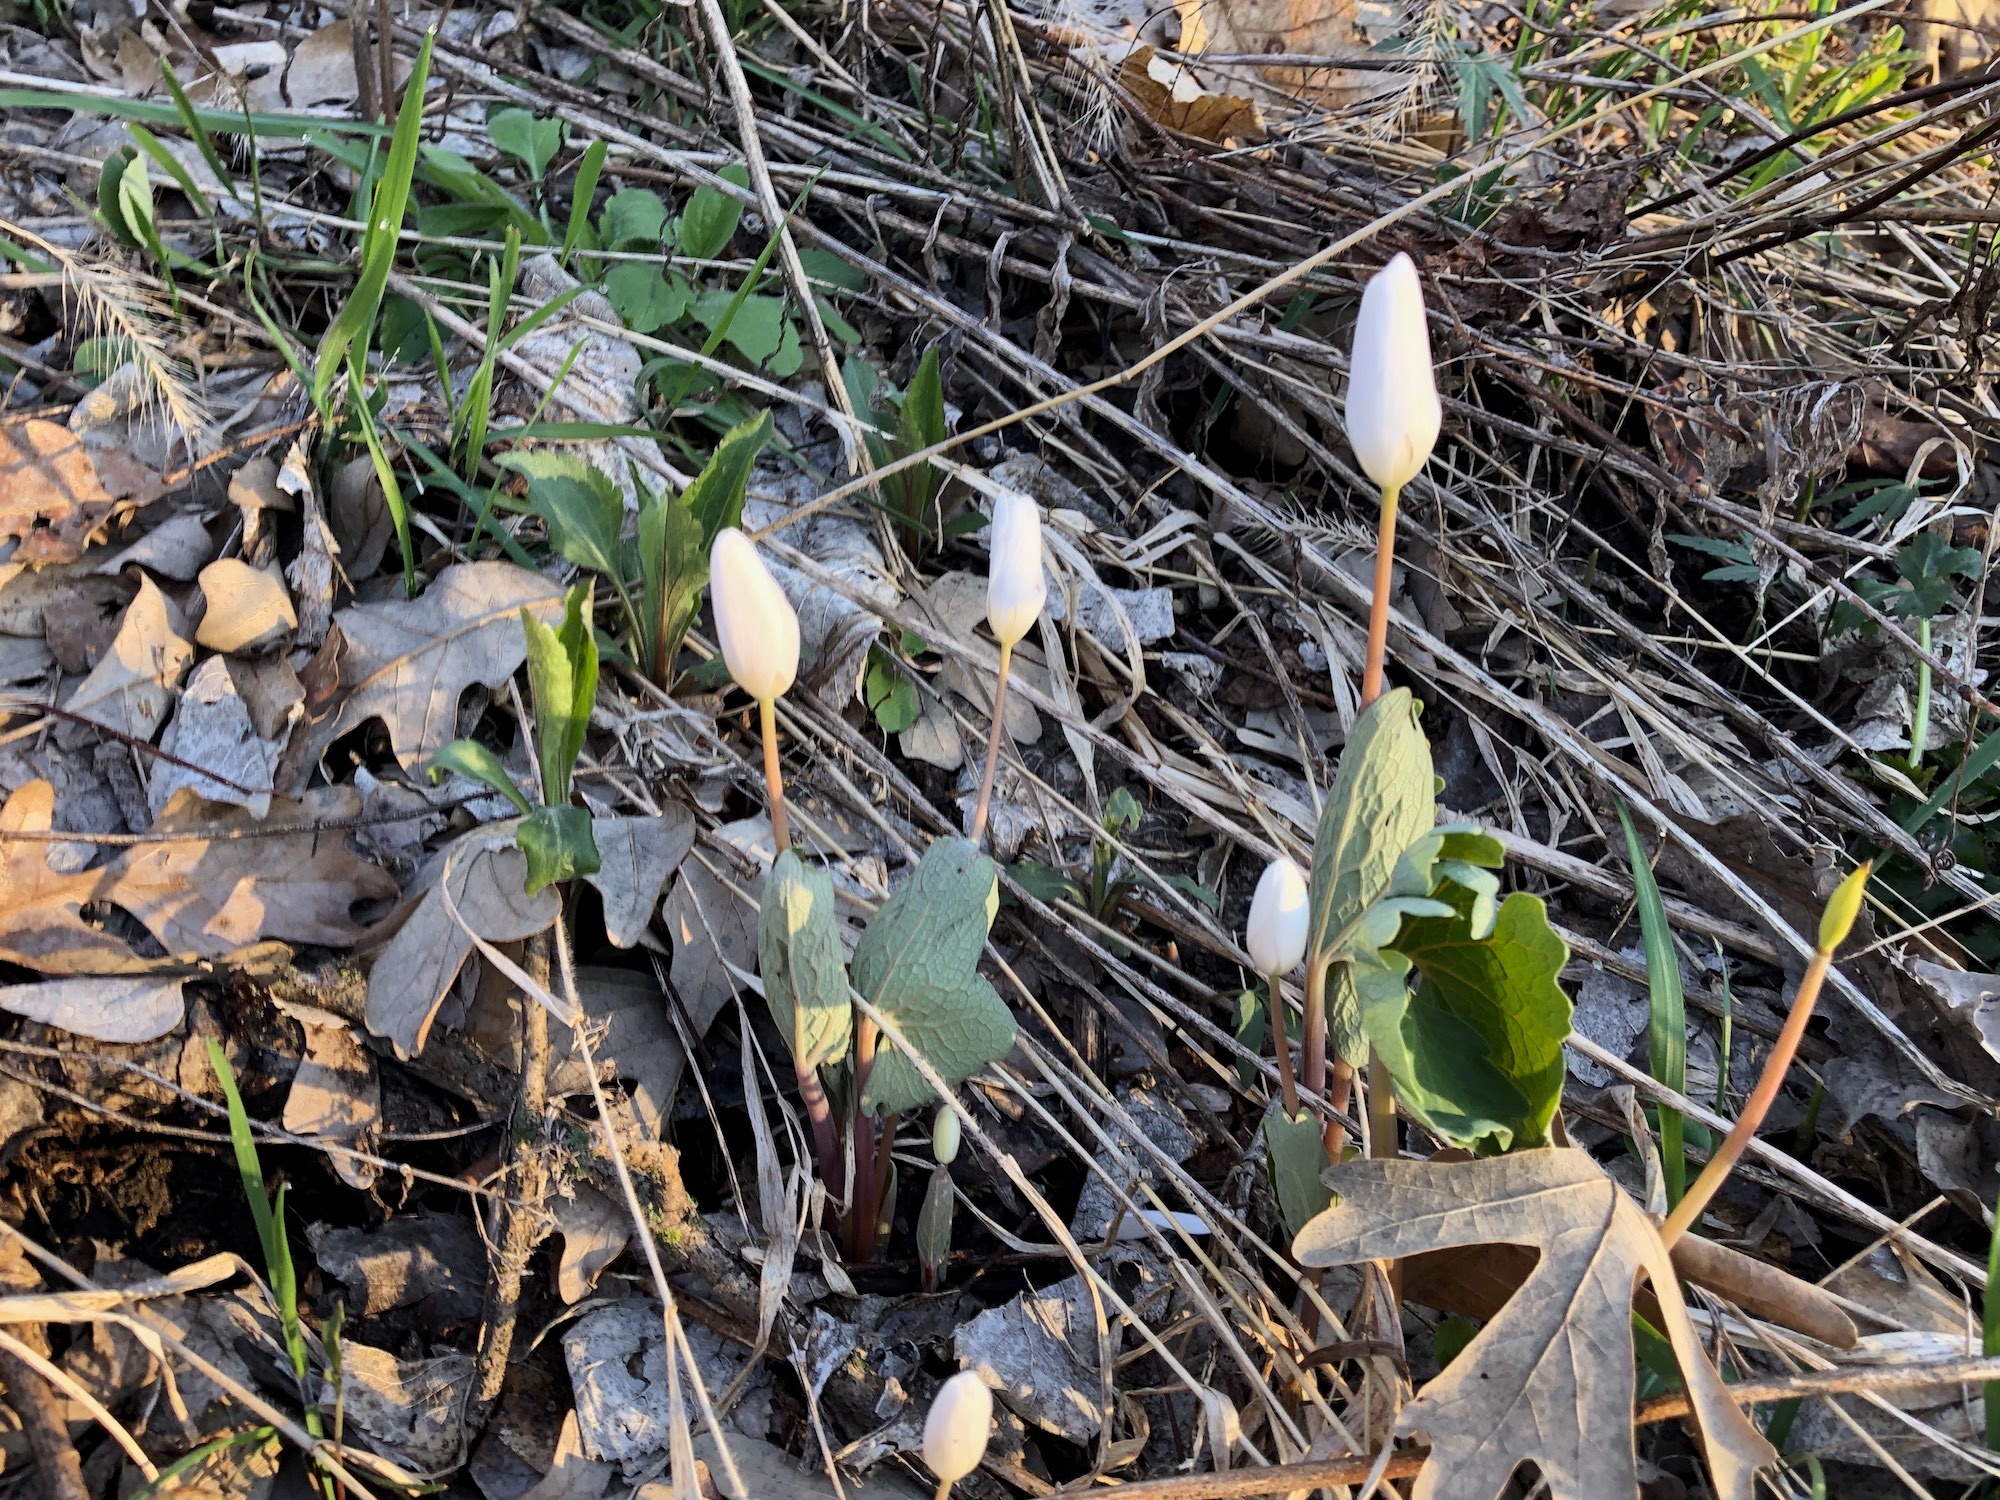 Bloodroot near Council Ring on April 13, 2019.